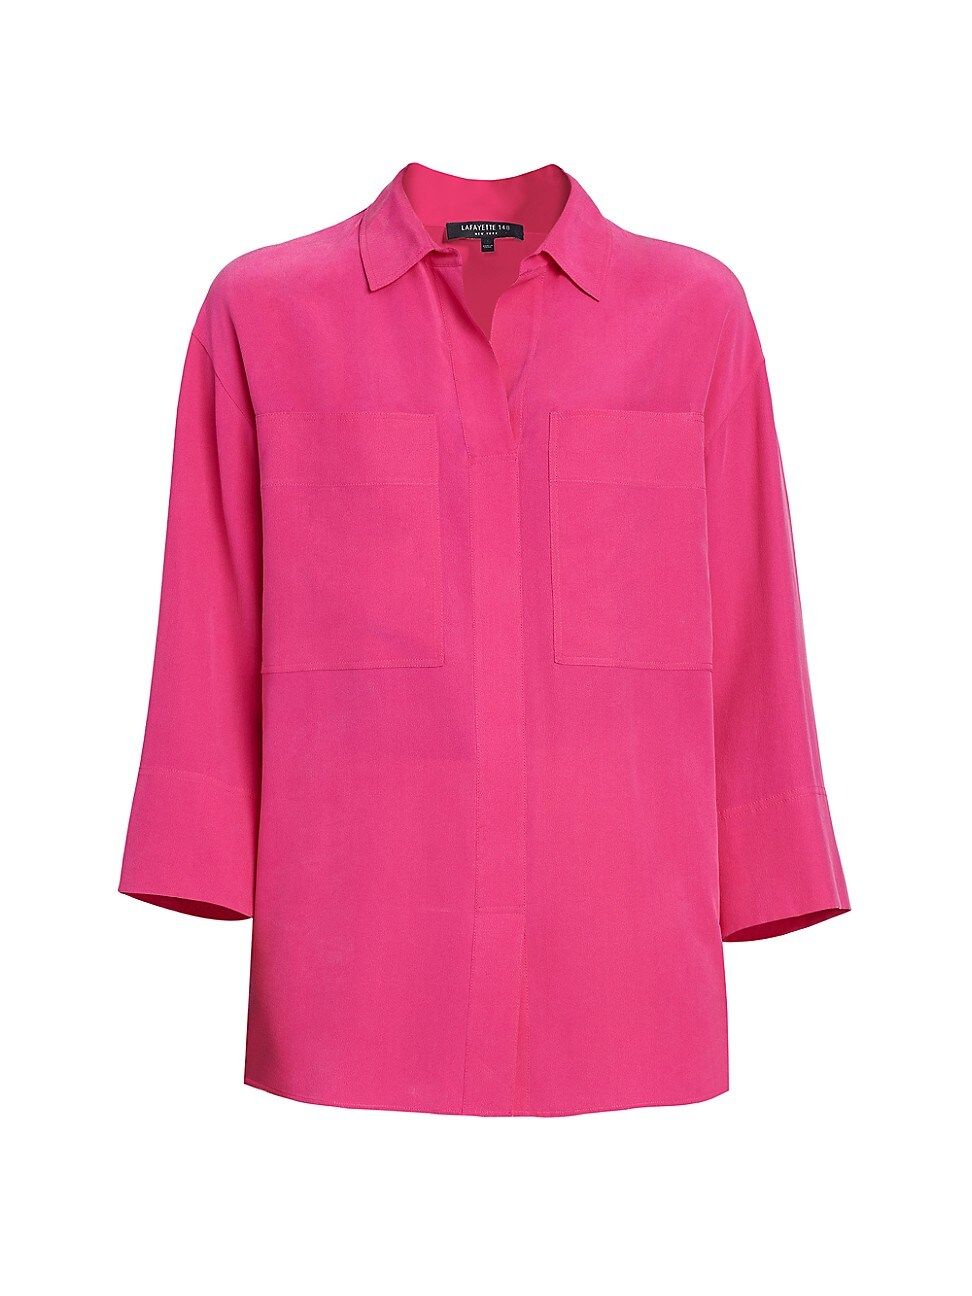 Lafayette 148 New York Women's Klein Silk Blouse - Orchid Pink - Size Small | Saks Fifth Avenue